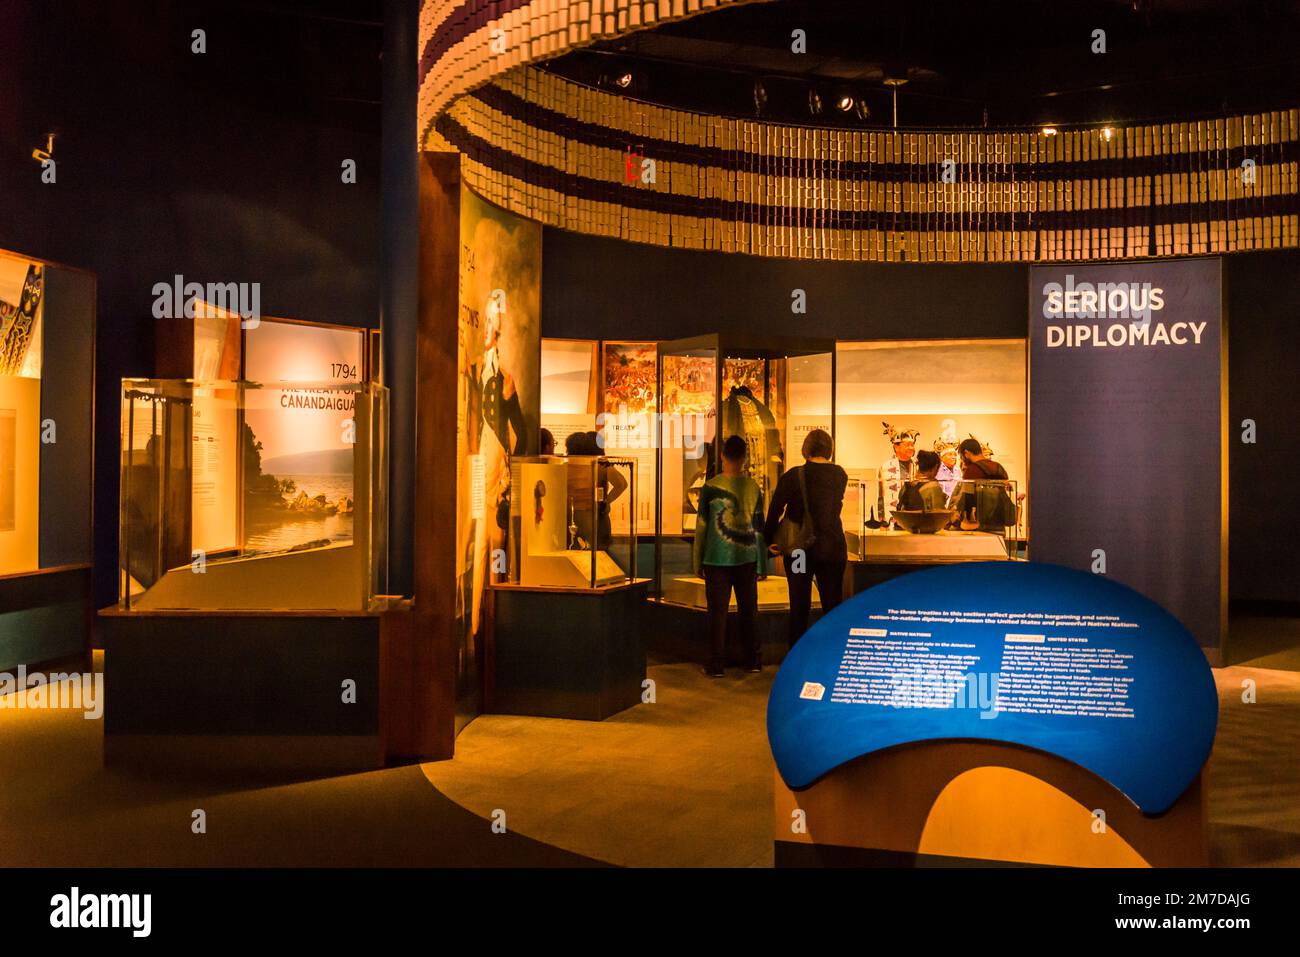 Exhibits that deal with the colonisation and various treaties signed between the White people and Indians, National Museum of the American Indian, Was Stock Photo